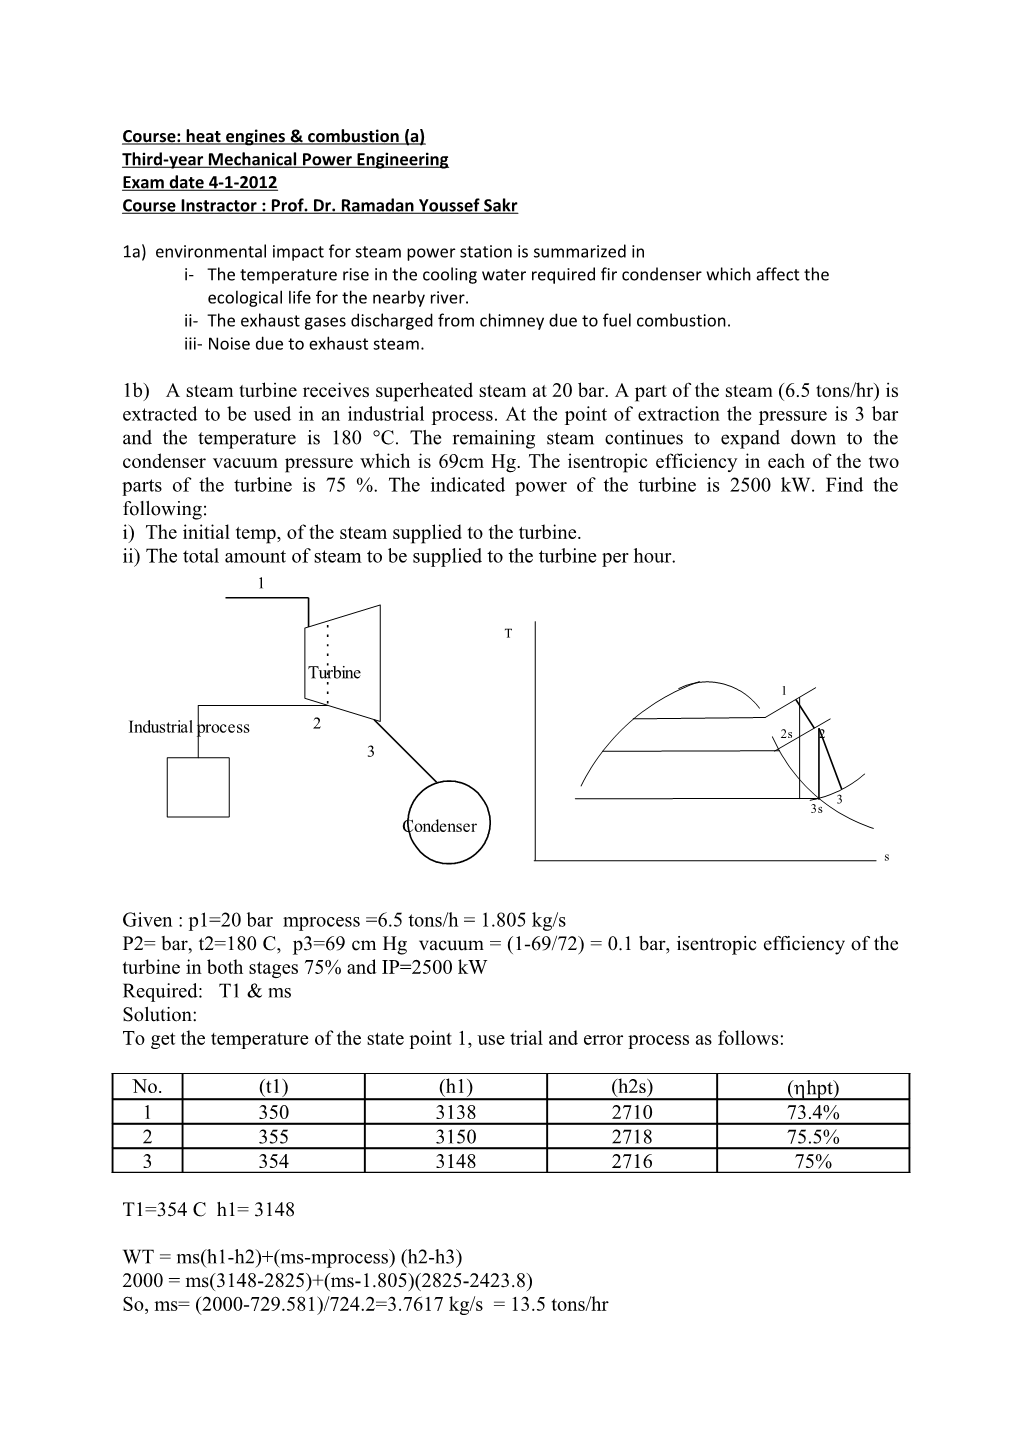 Course: Heat Engines & Combustion (A)